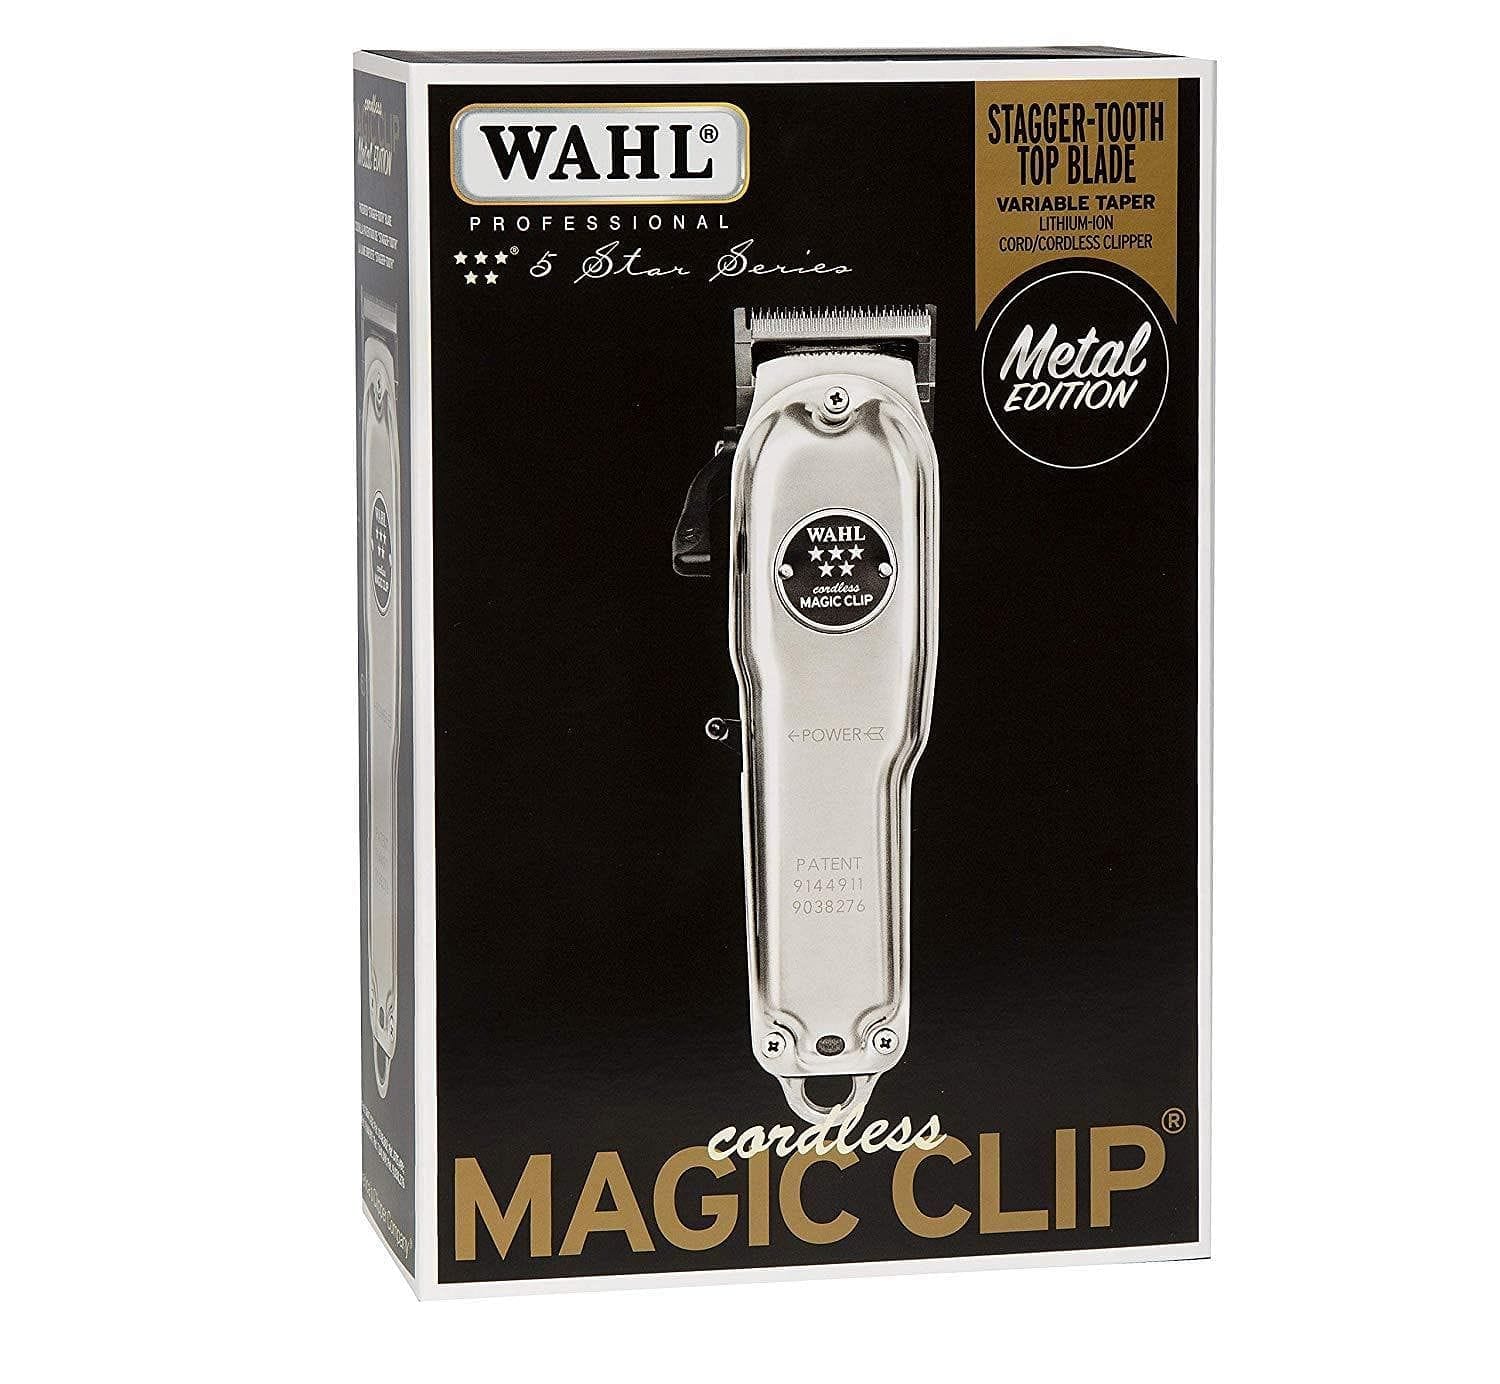 Wahl 8509 Professional 5 Star Series Metal Edition Cordless Magic Clip –  Goldy TV